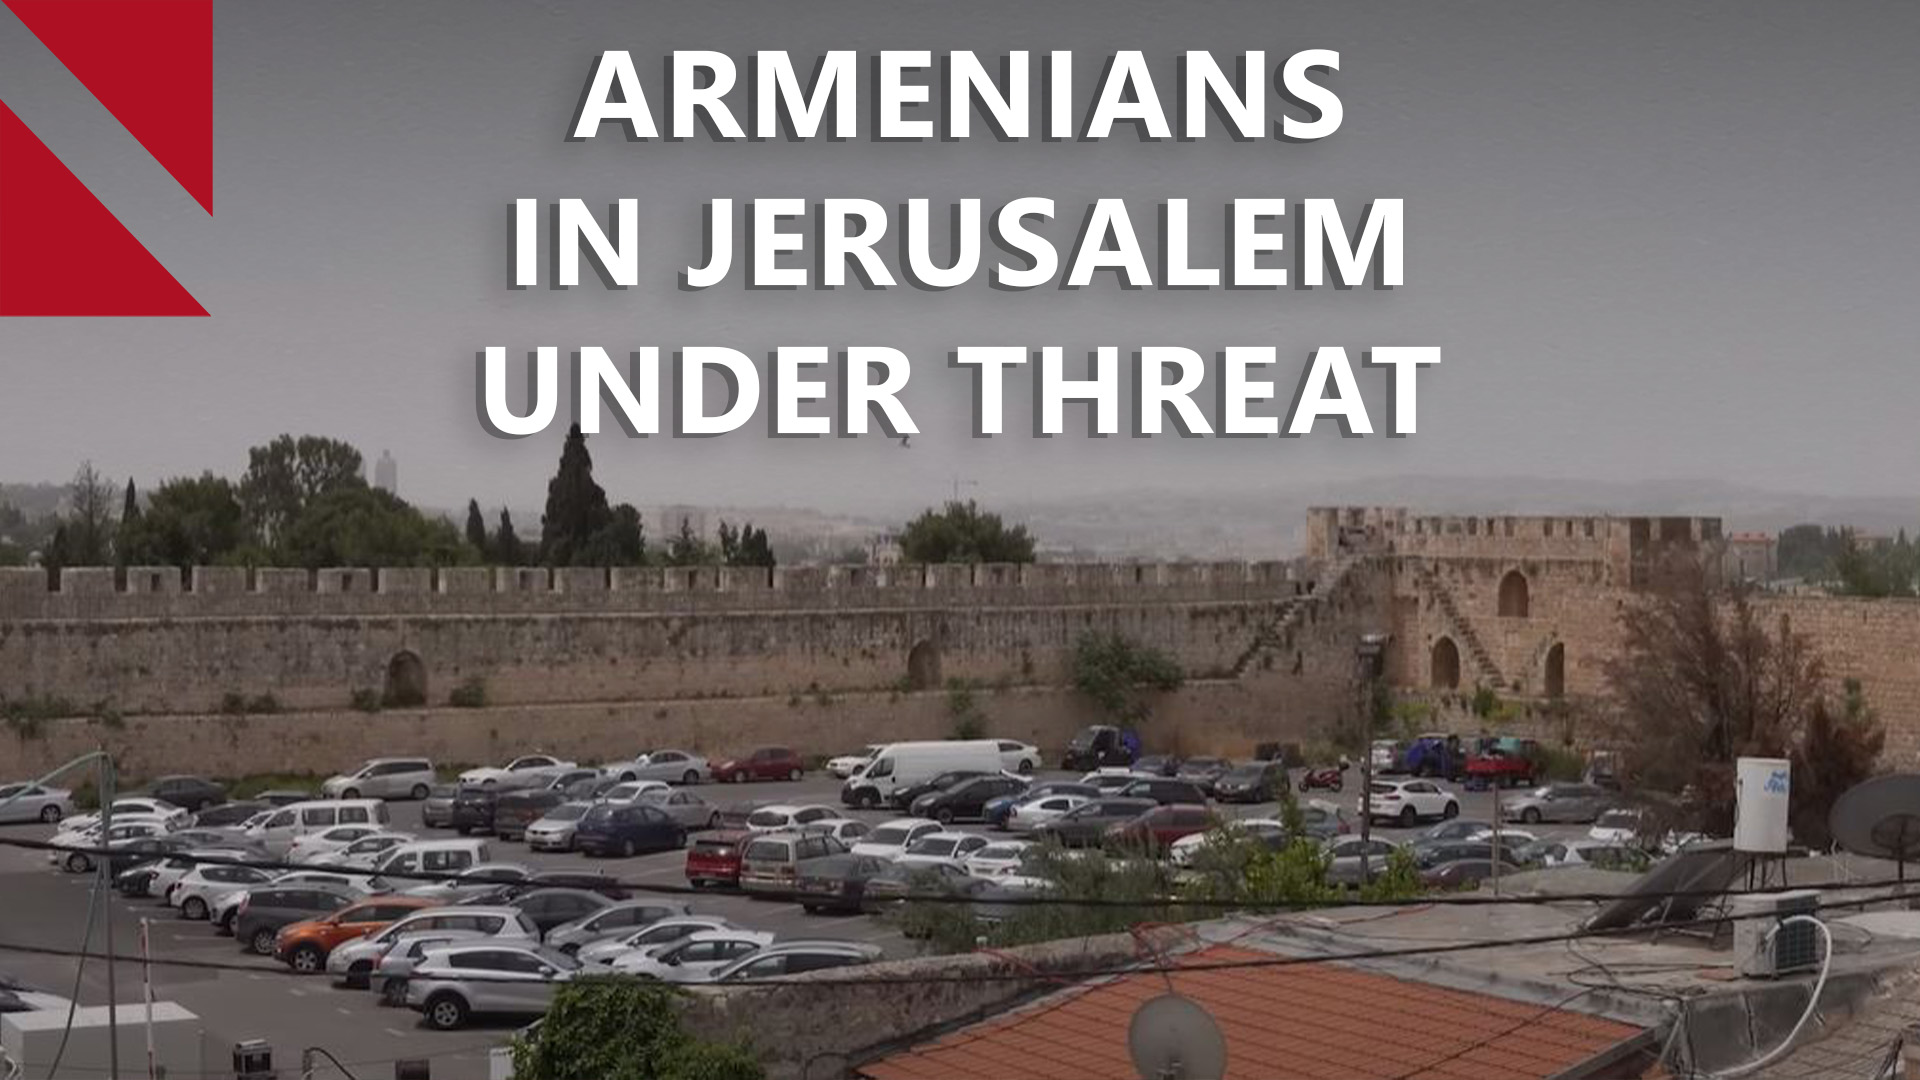 ‘We are here to stay,’ pledge Jerusalem’s Armenians, as land conflict escalates